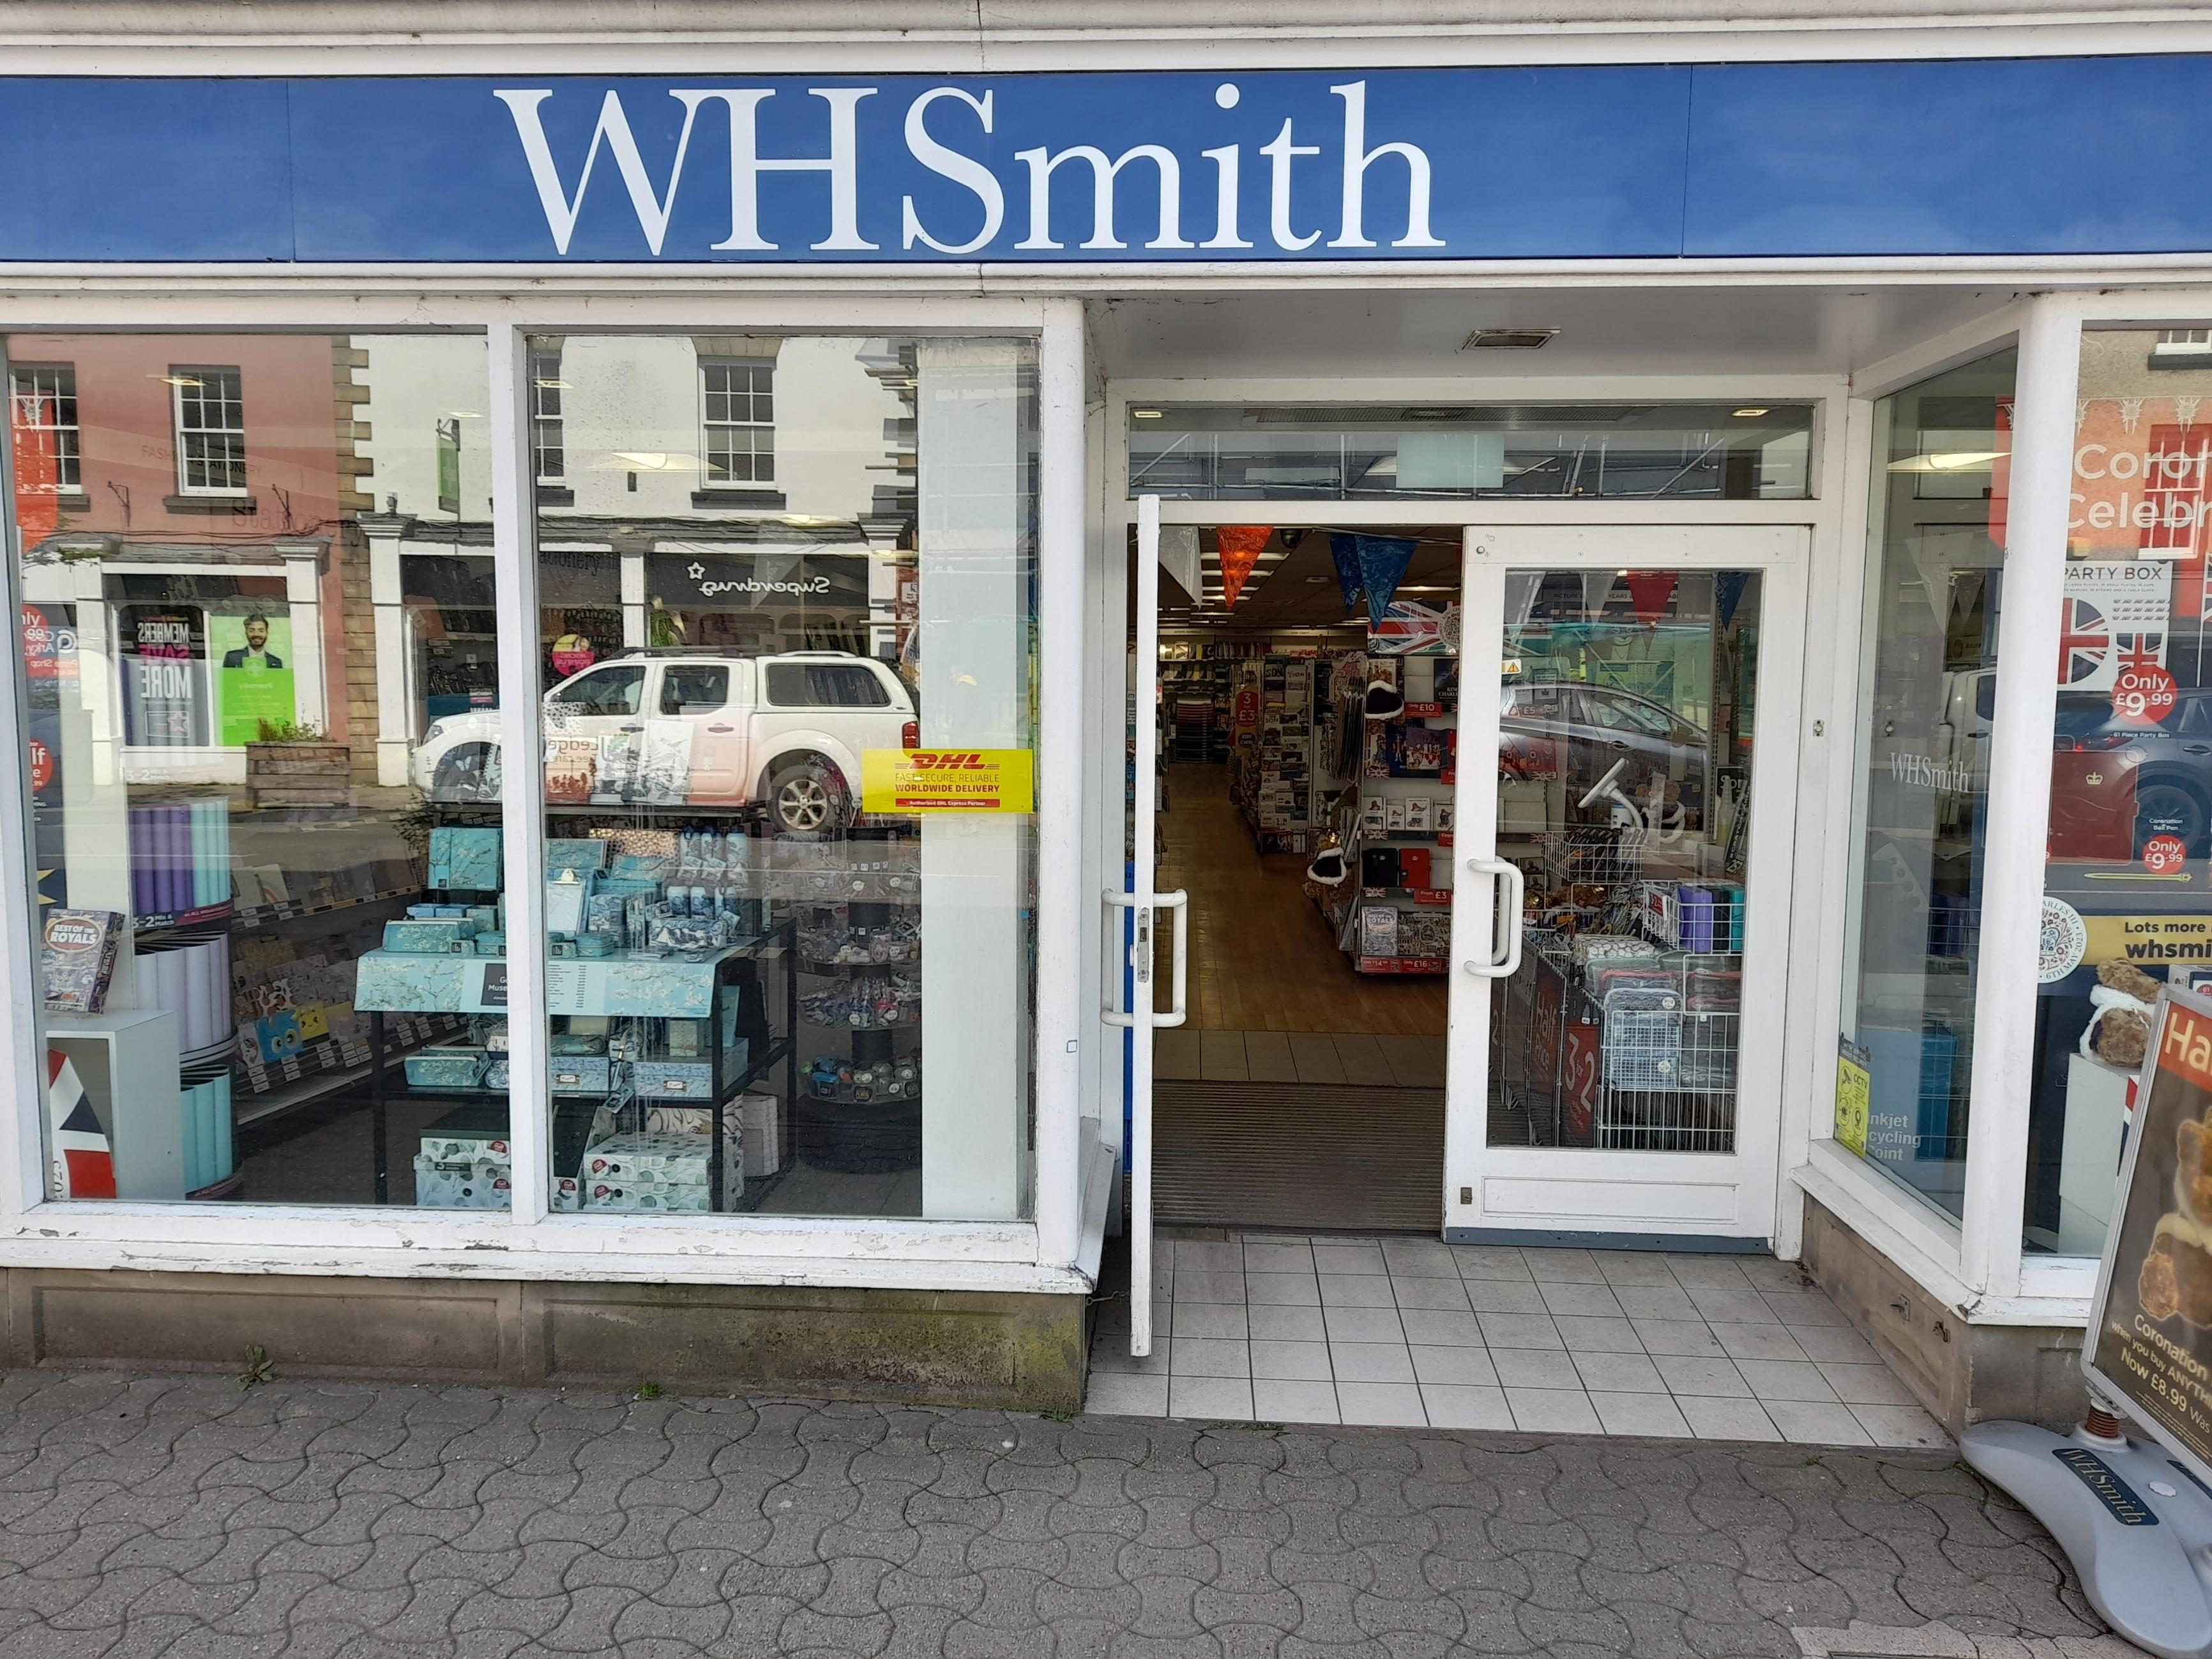 Images DHL Express Service Point (WHSmith Monmouth)